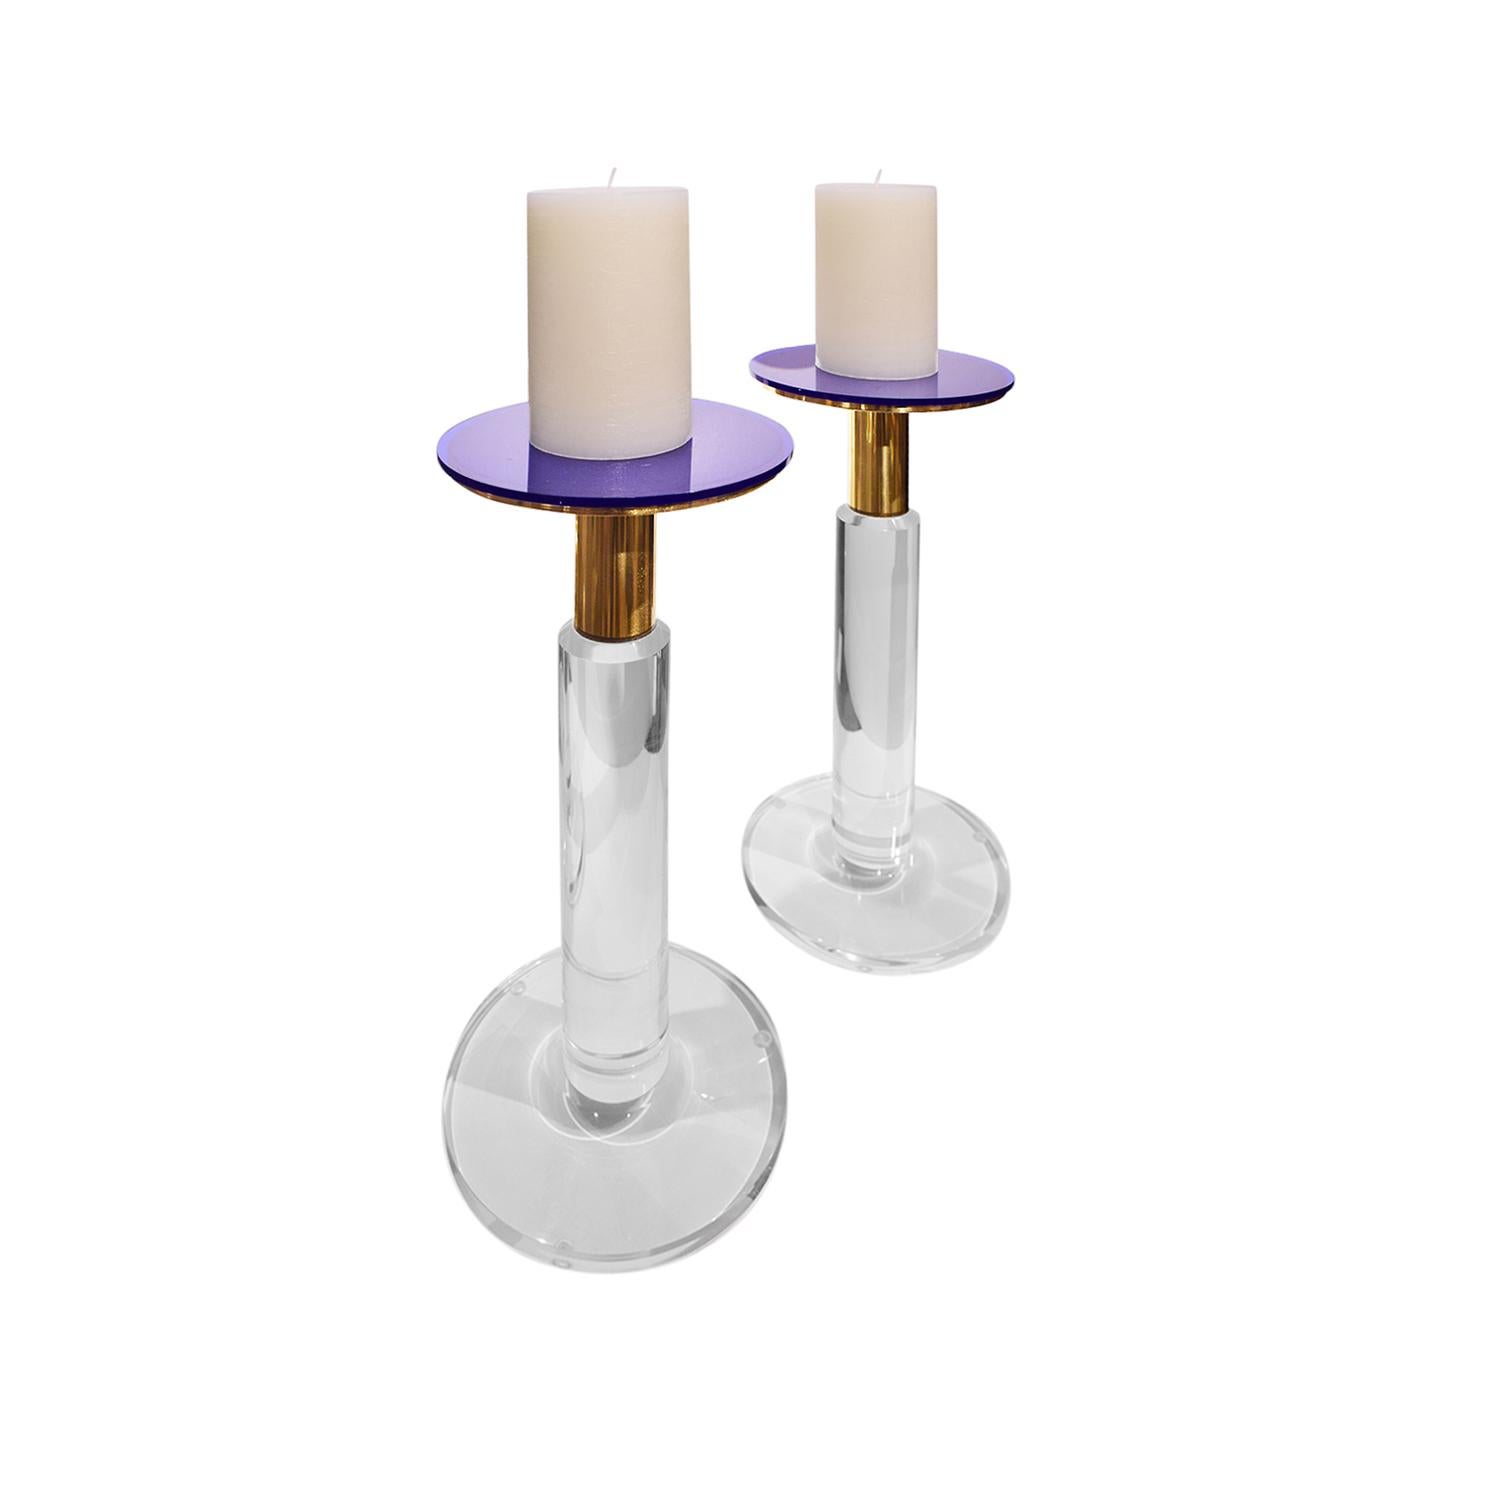 Pair of rare prototype candleholders in Lucite and brass by Karl Springer, American, circa 1985. Only a small number of these were made.

Provenance:
From the Collection of a Karl Springer Employee

Reference:
Authentication from Karl Springer